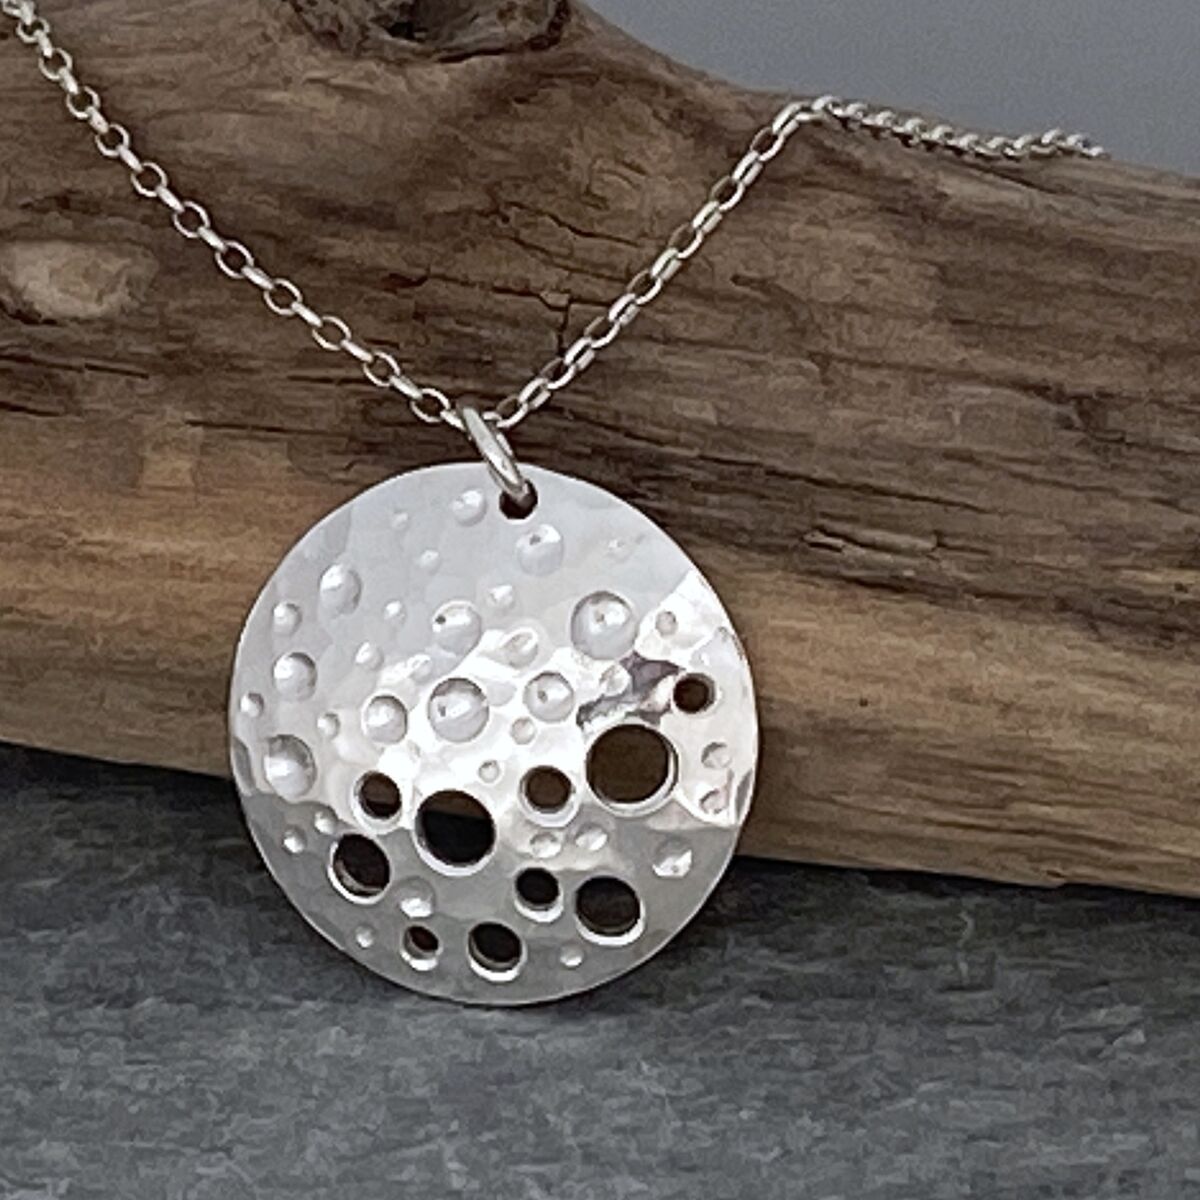 Round silver necklace